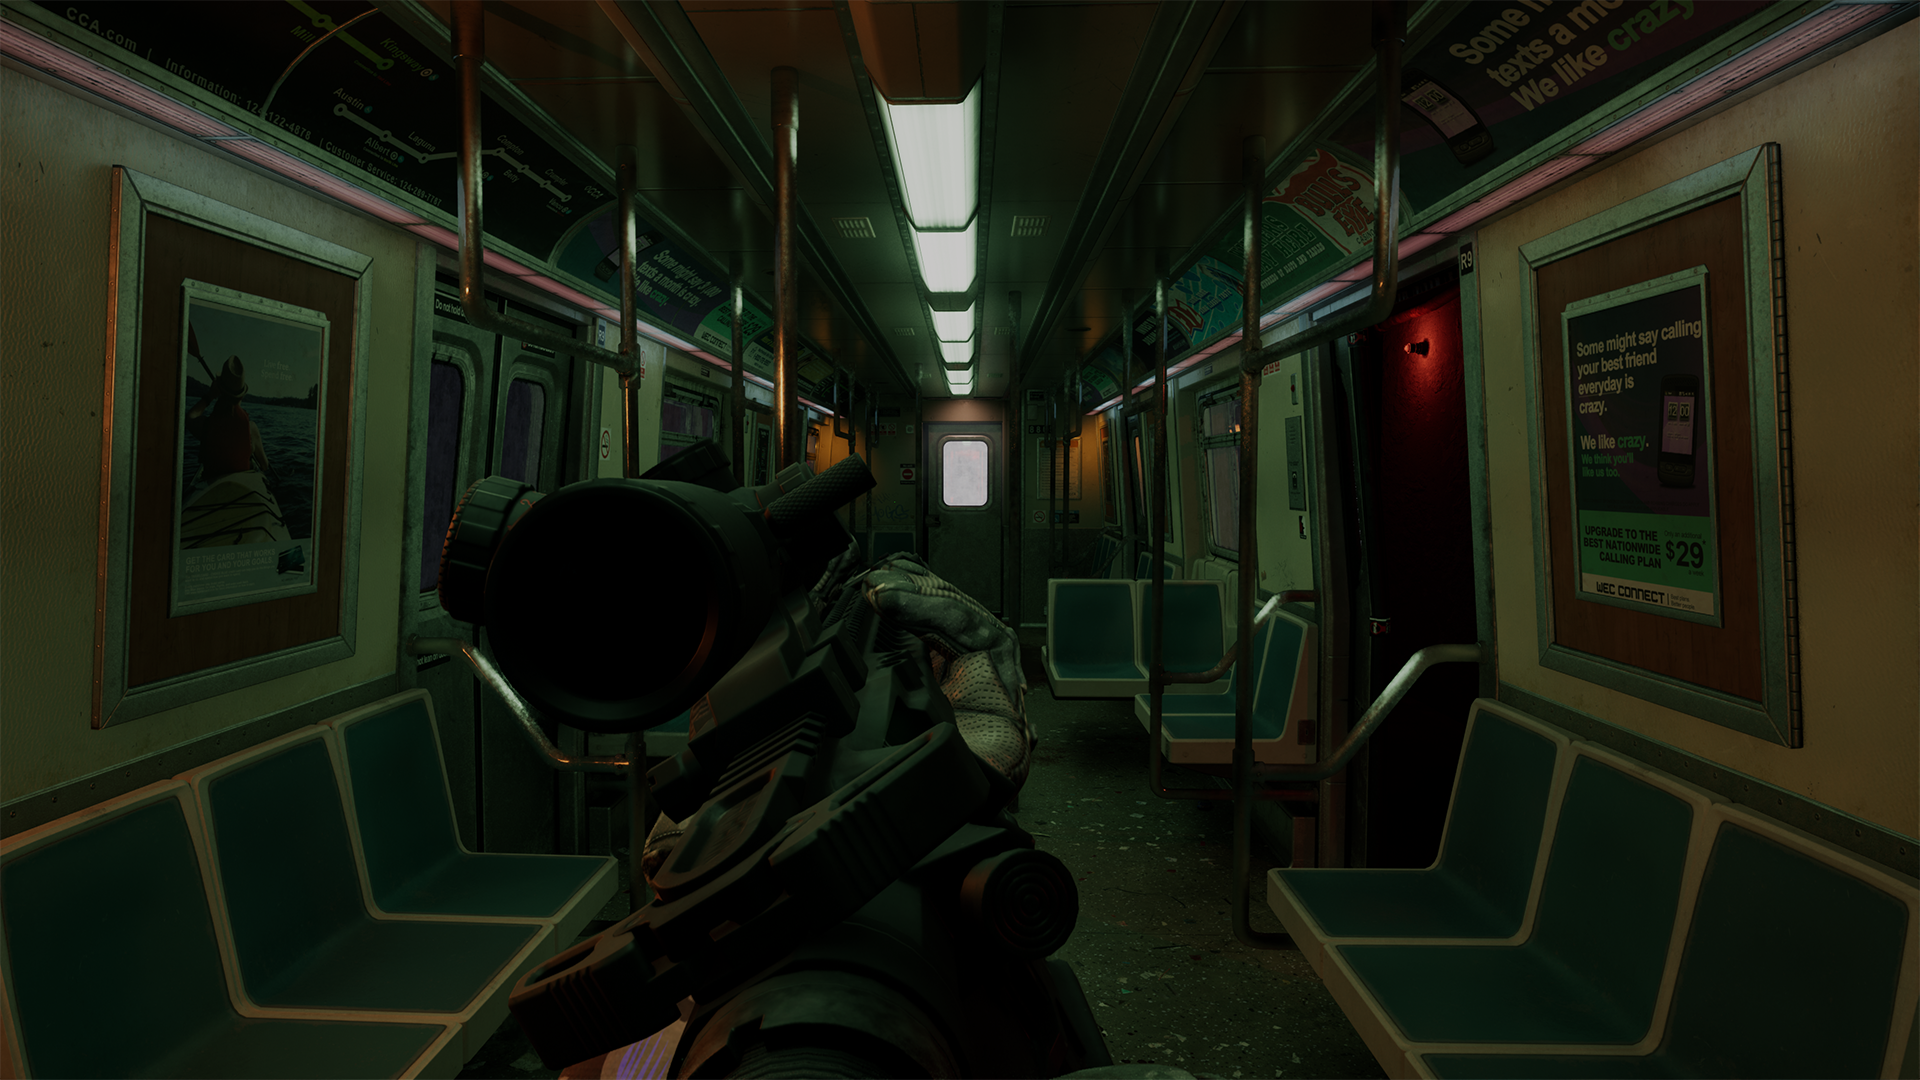 Moving through some kind of haunted train in Veil.